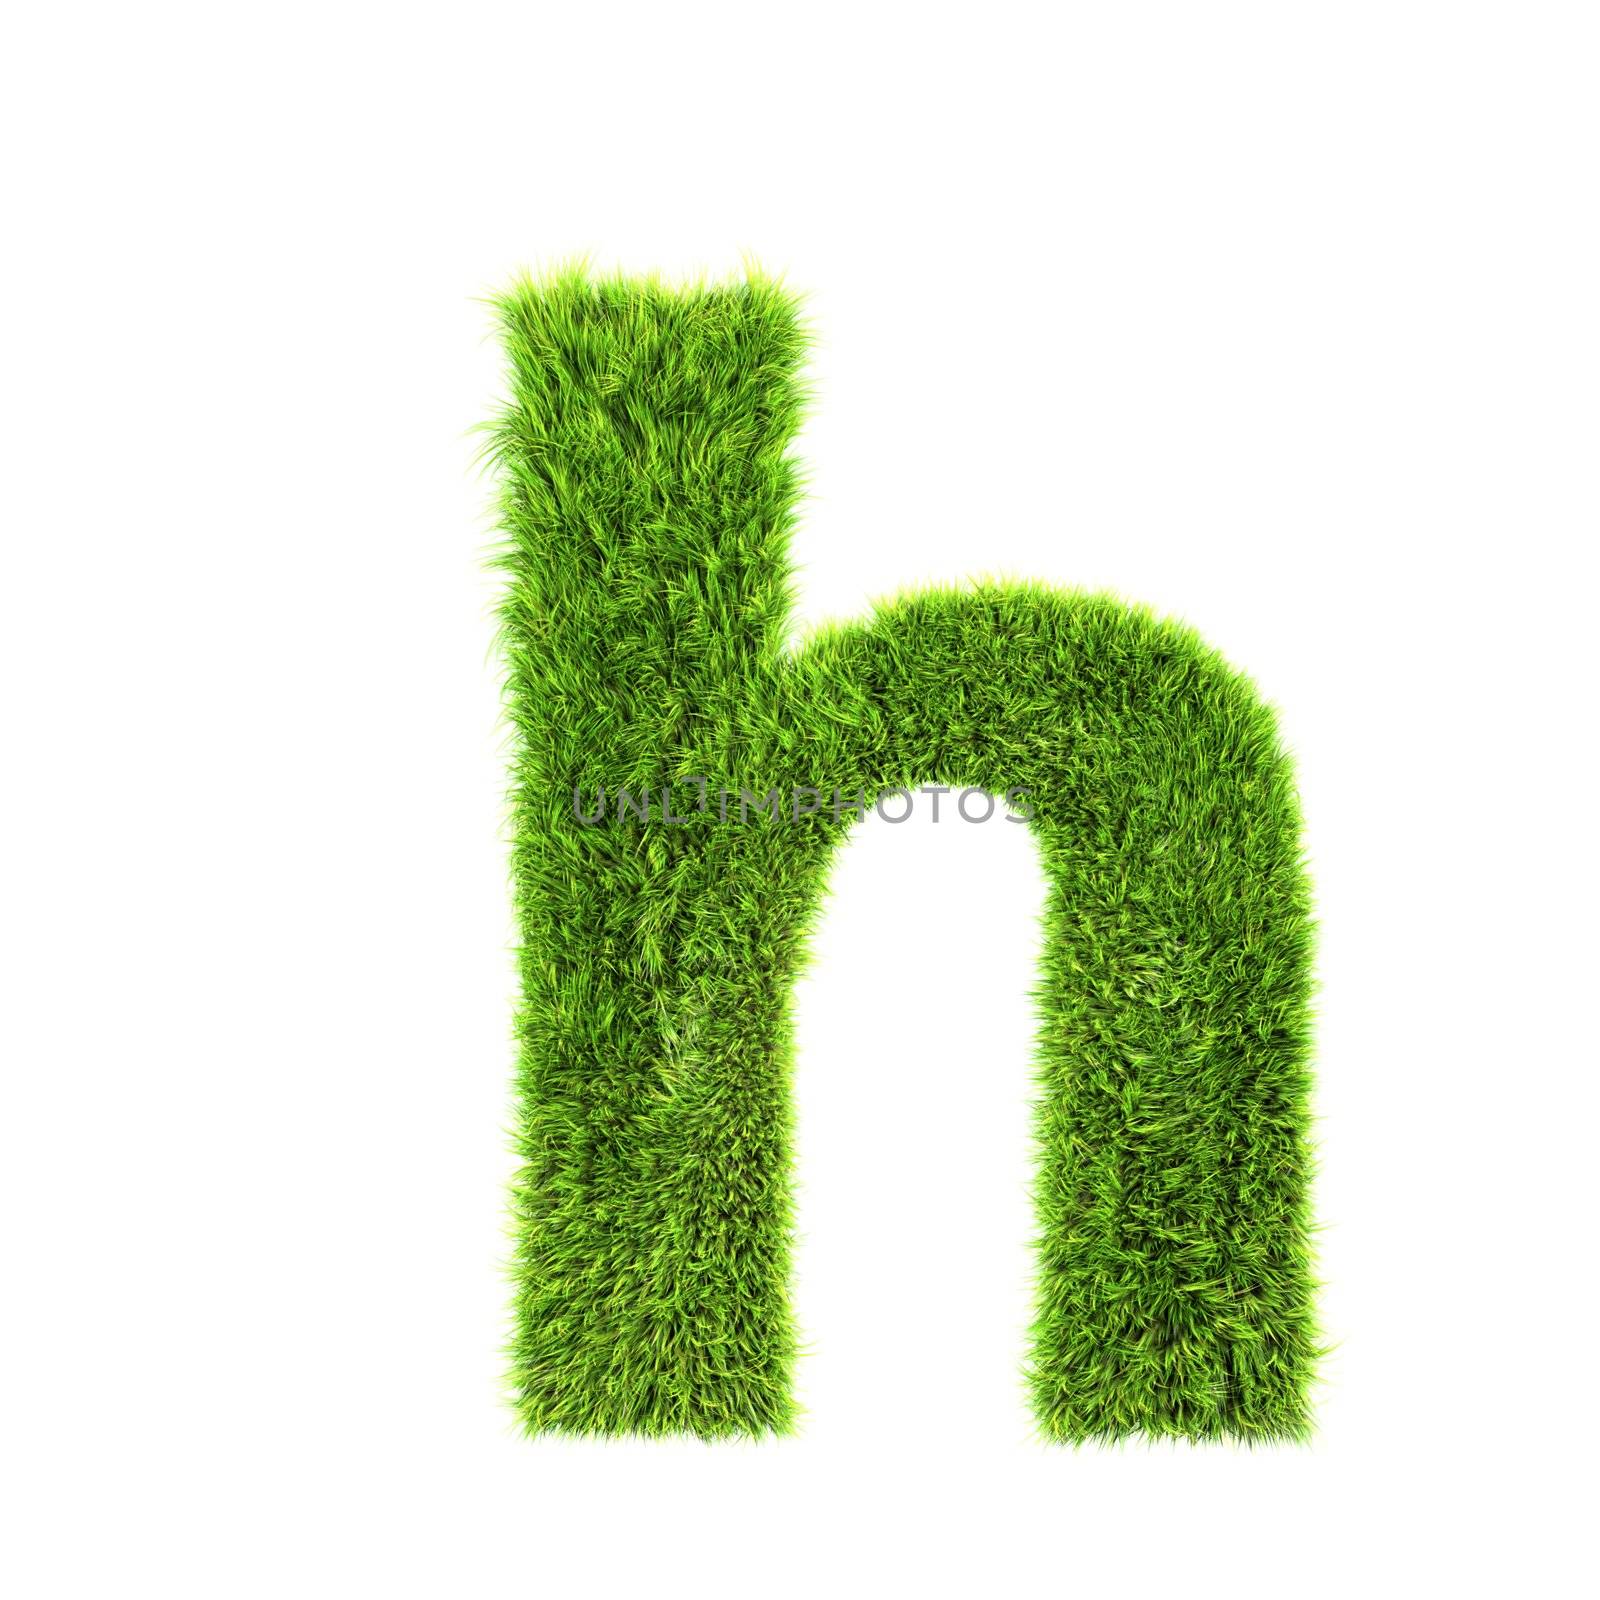 3d grass letter isolated on white background - h